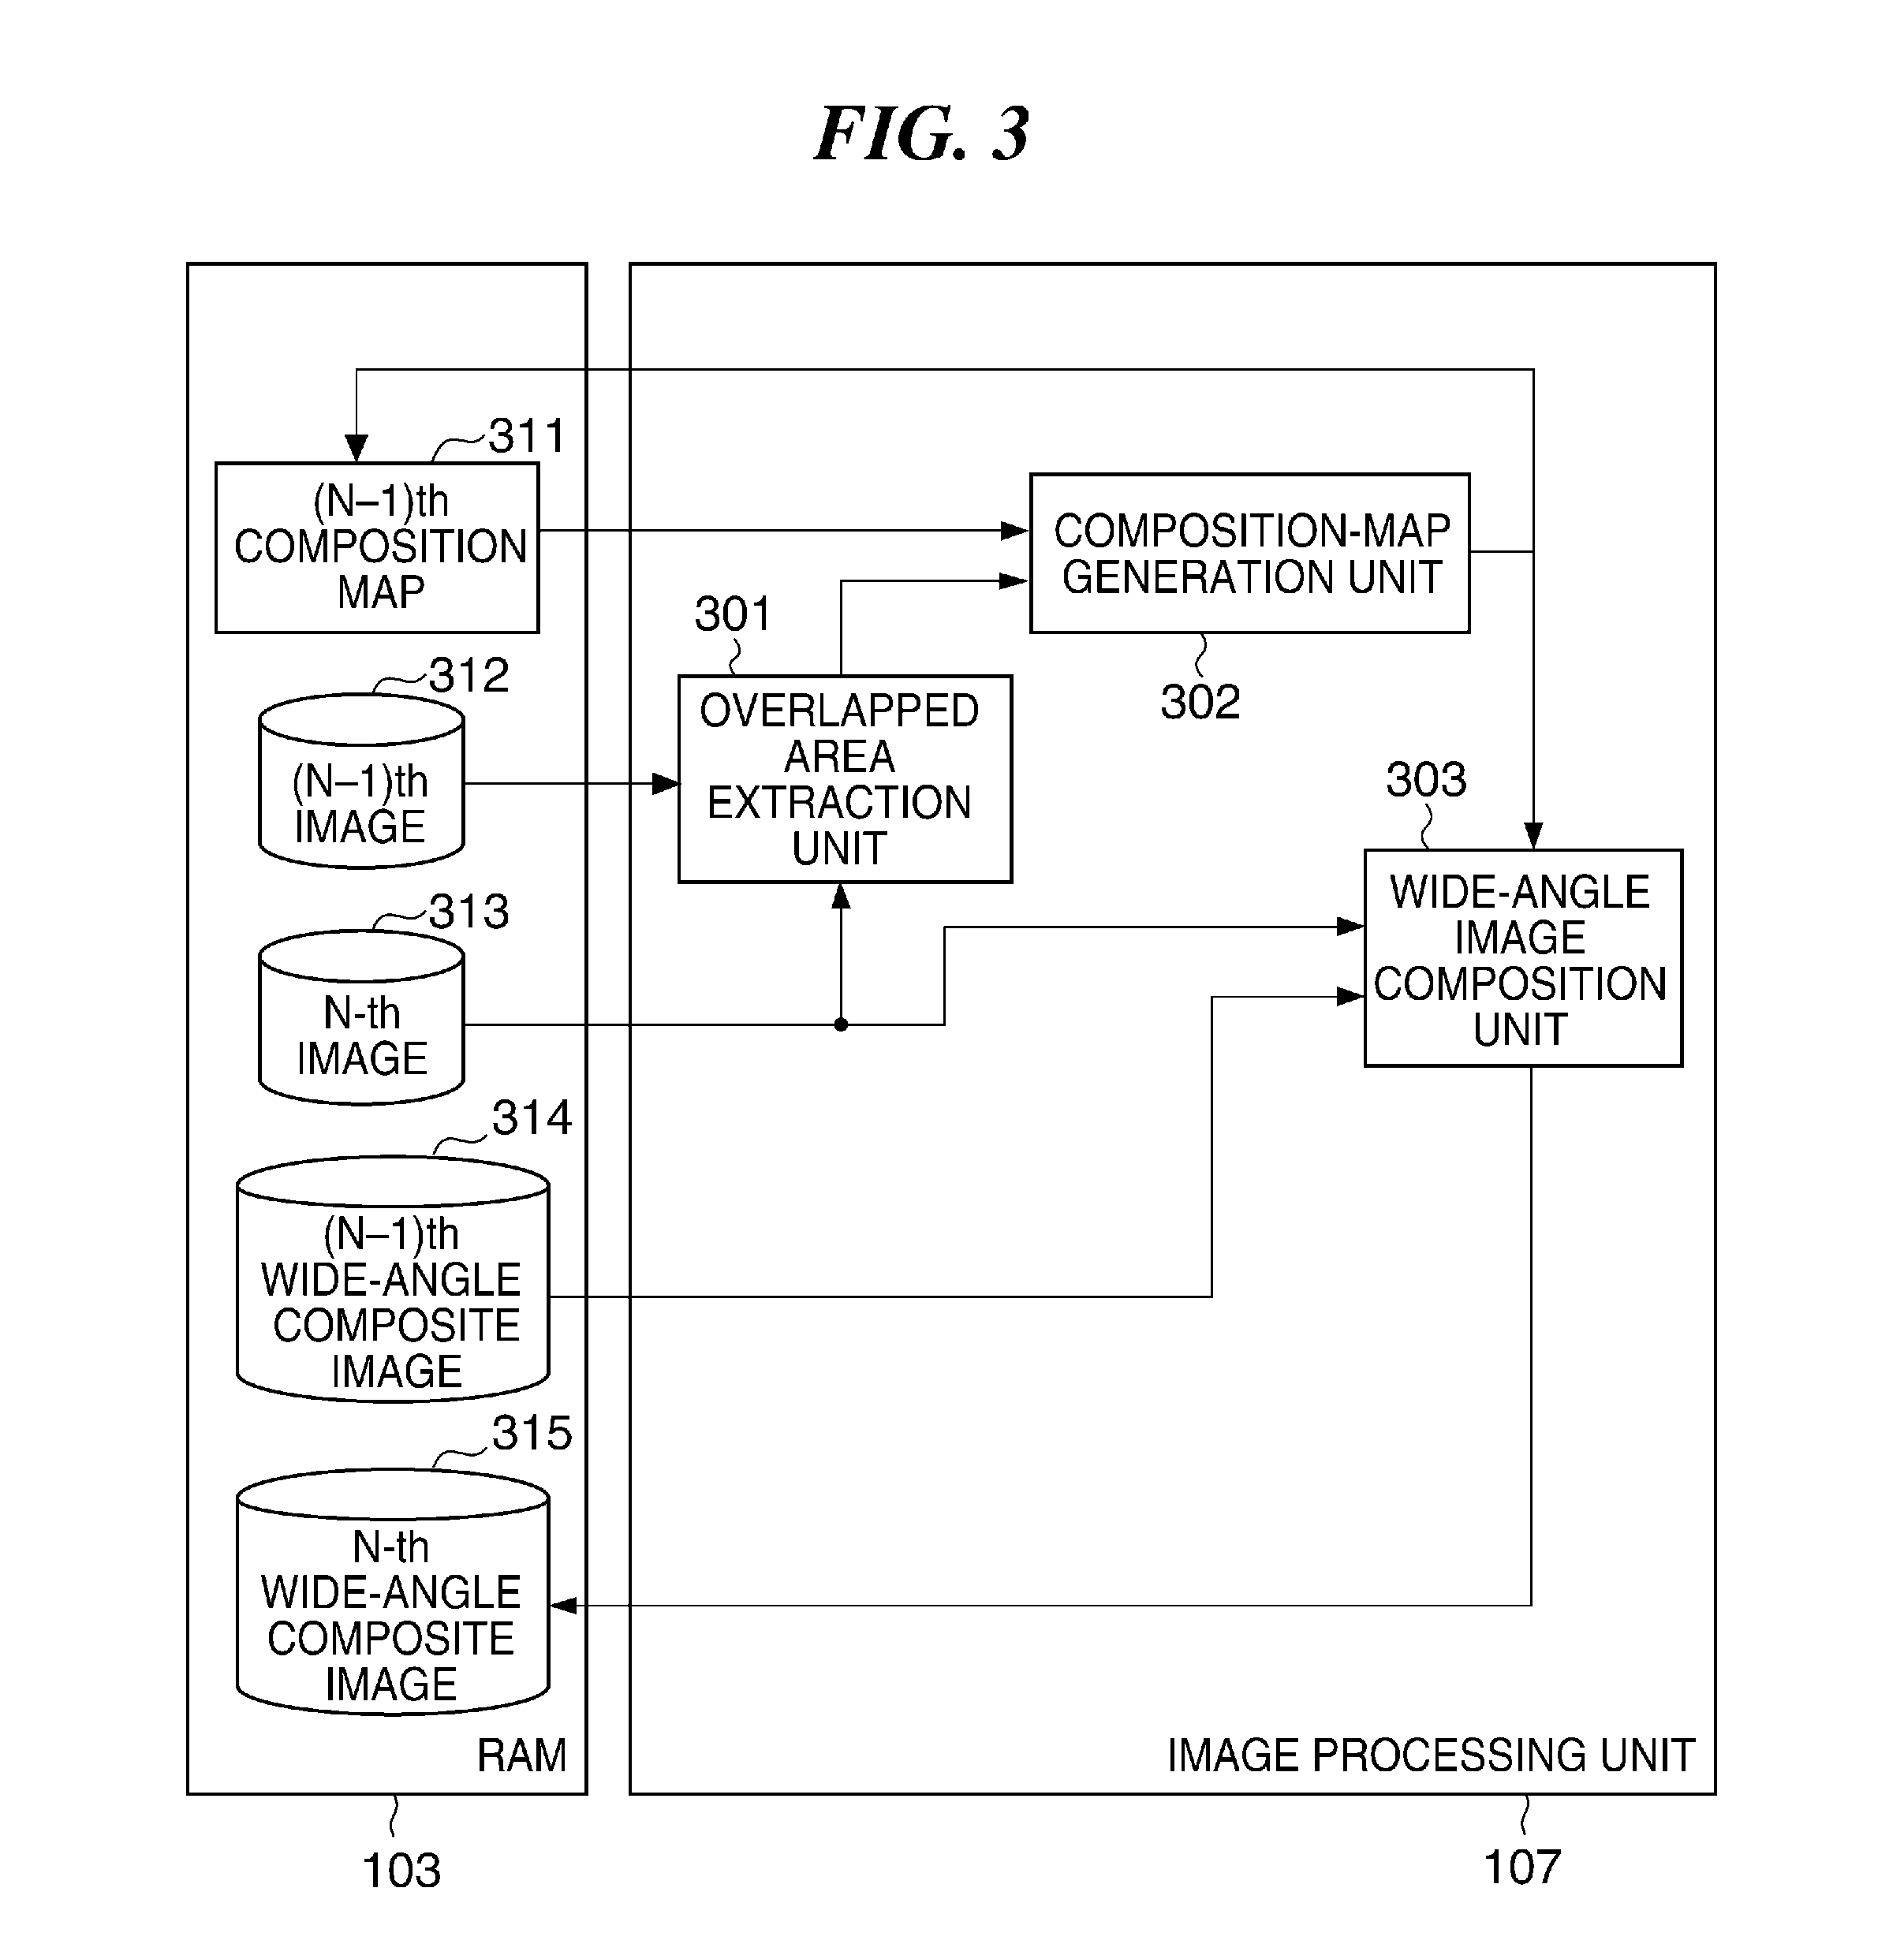 Image processing apparatus for generating wide-angle image by compositing plural images, image processing method, storage medium storing image processing program, and image pickup apparatus